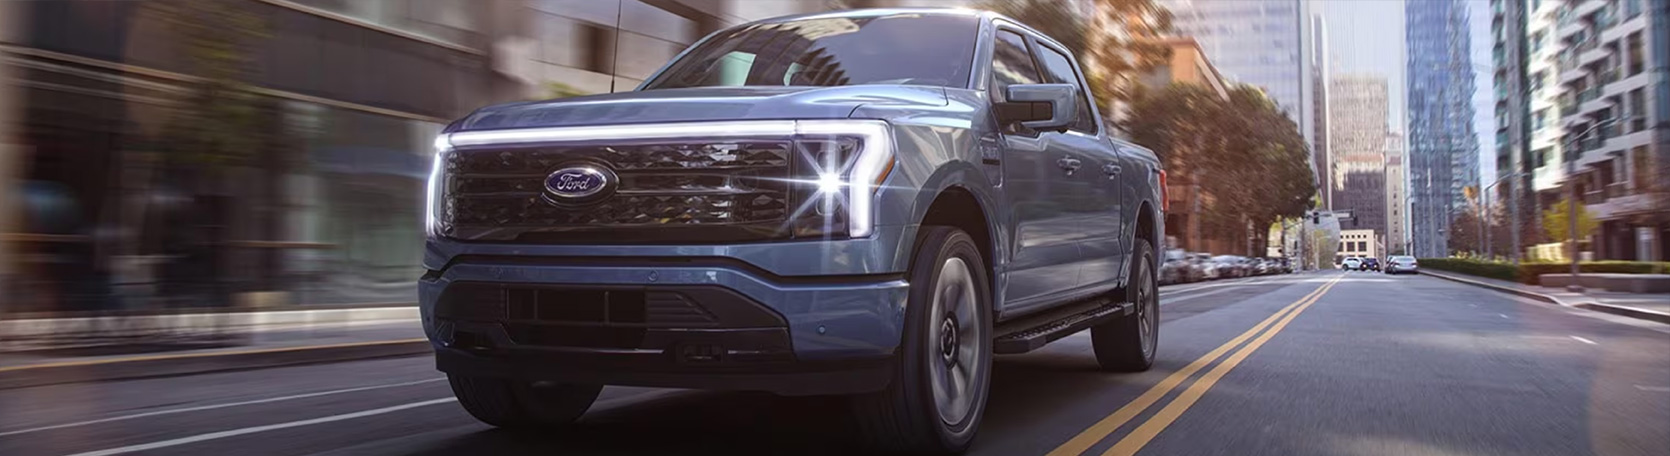 The 2023 Ford F-150 Lightning parked outdoors with a camper attached and the front trunk space open.